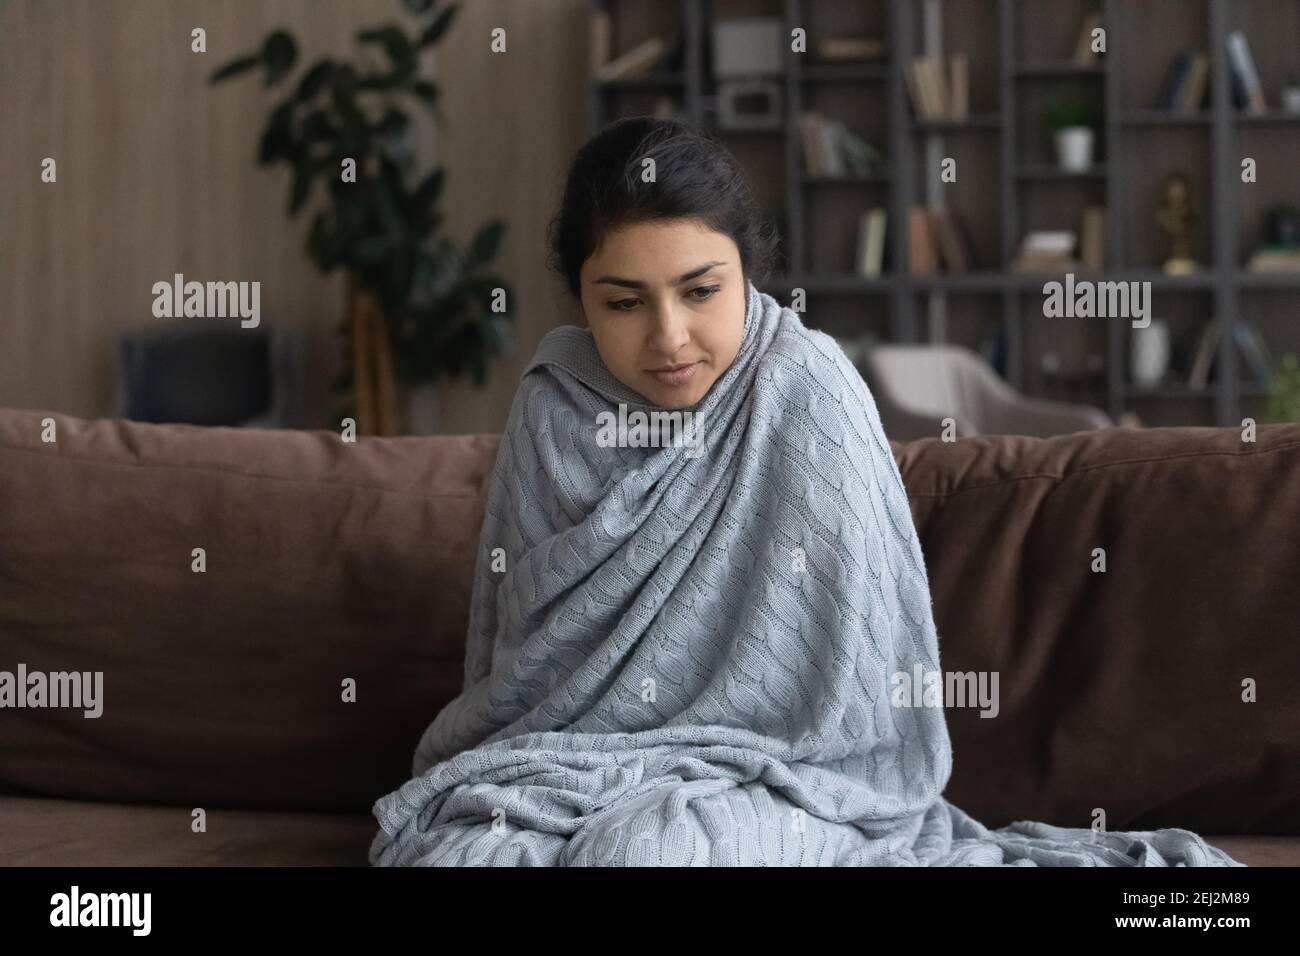 Sick young Indian woman wrapped in blanket feeling unhealthy Stock Photo